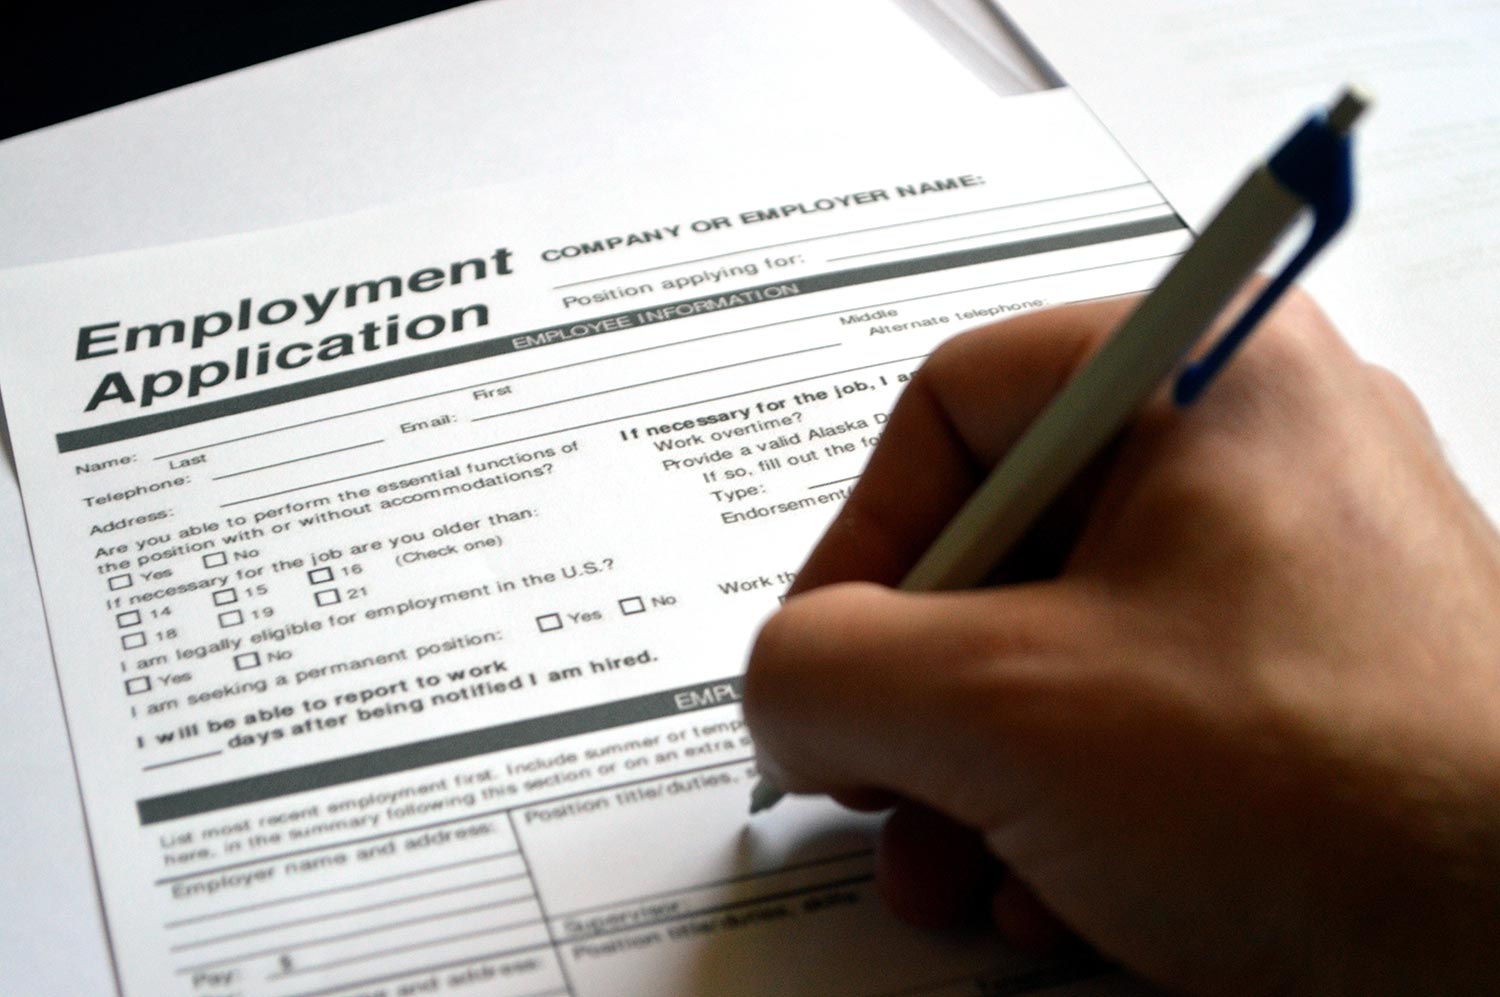 How to complete job application forms